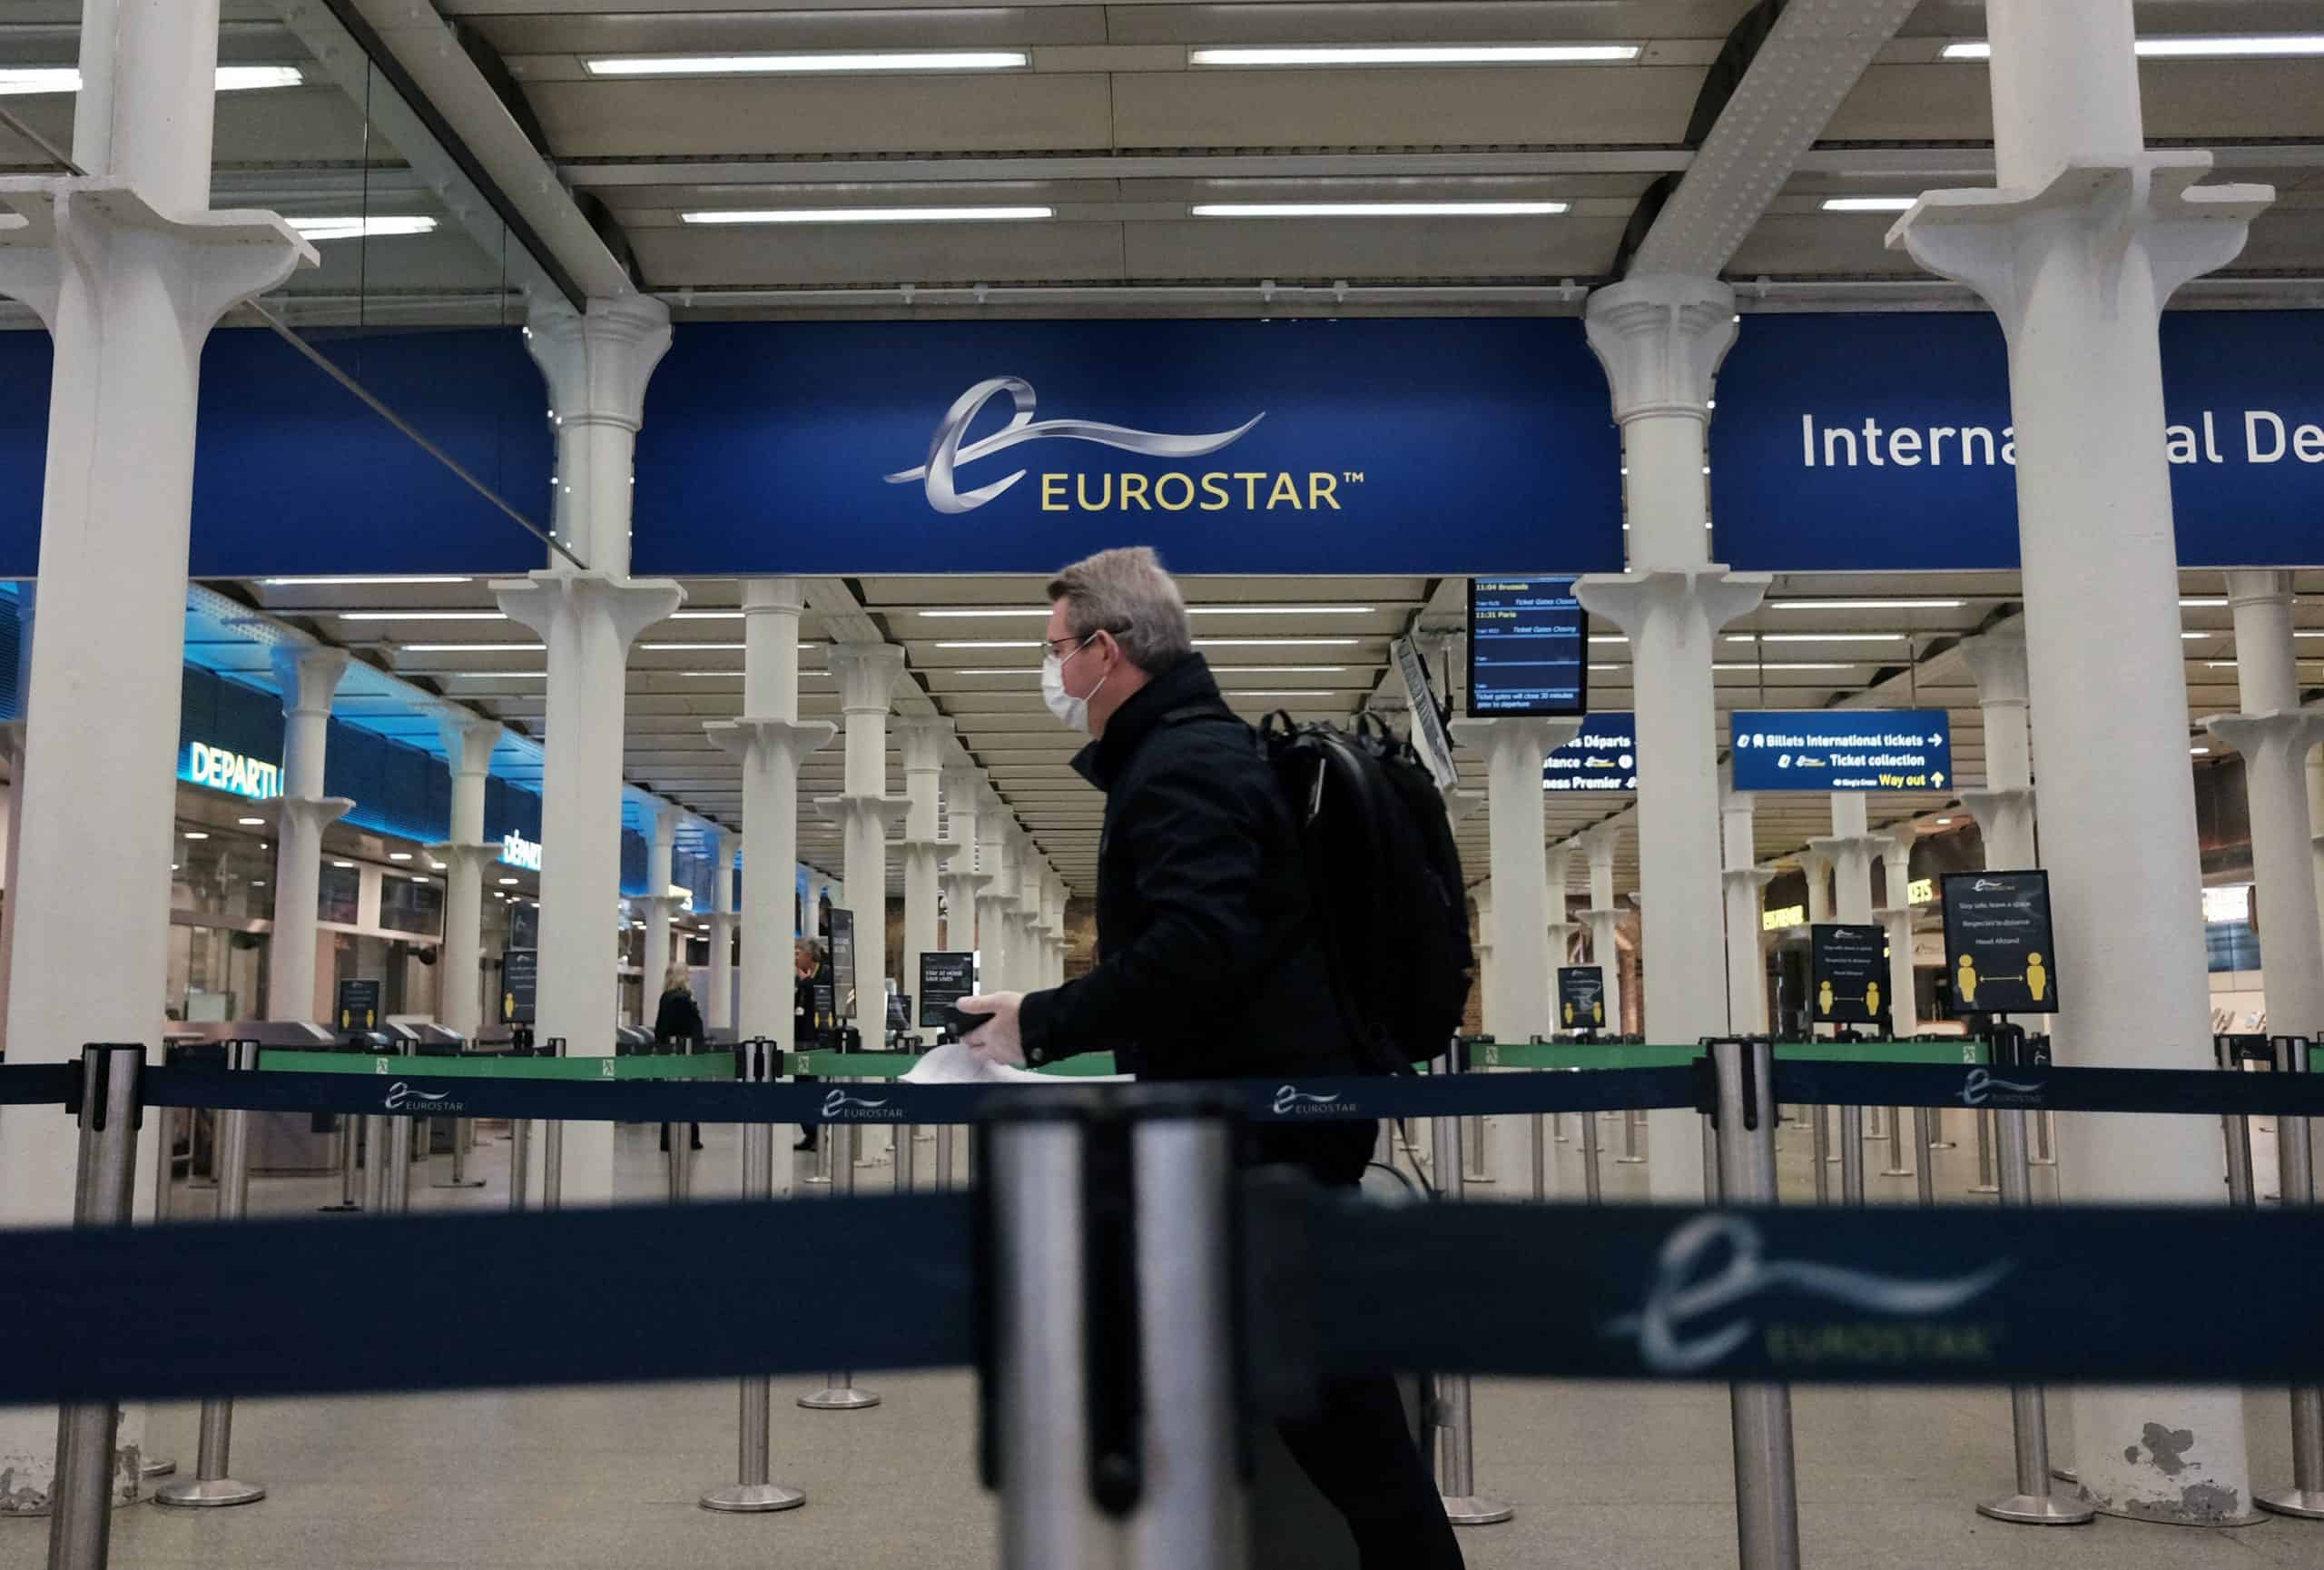 French officials to patrol Eurostar trains amid Brexit customs chaos